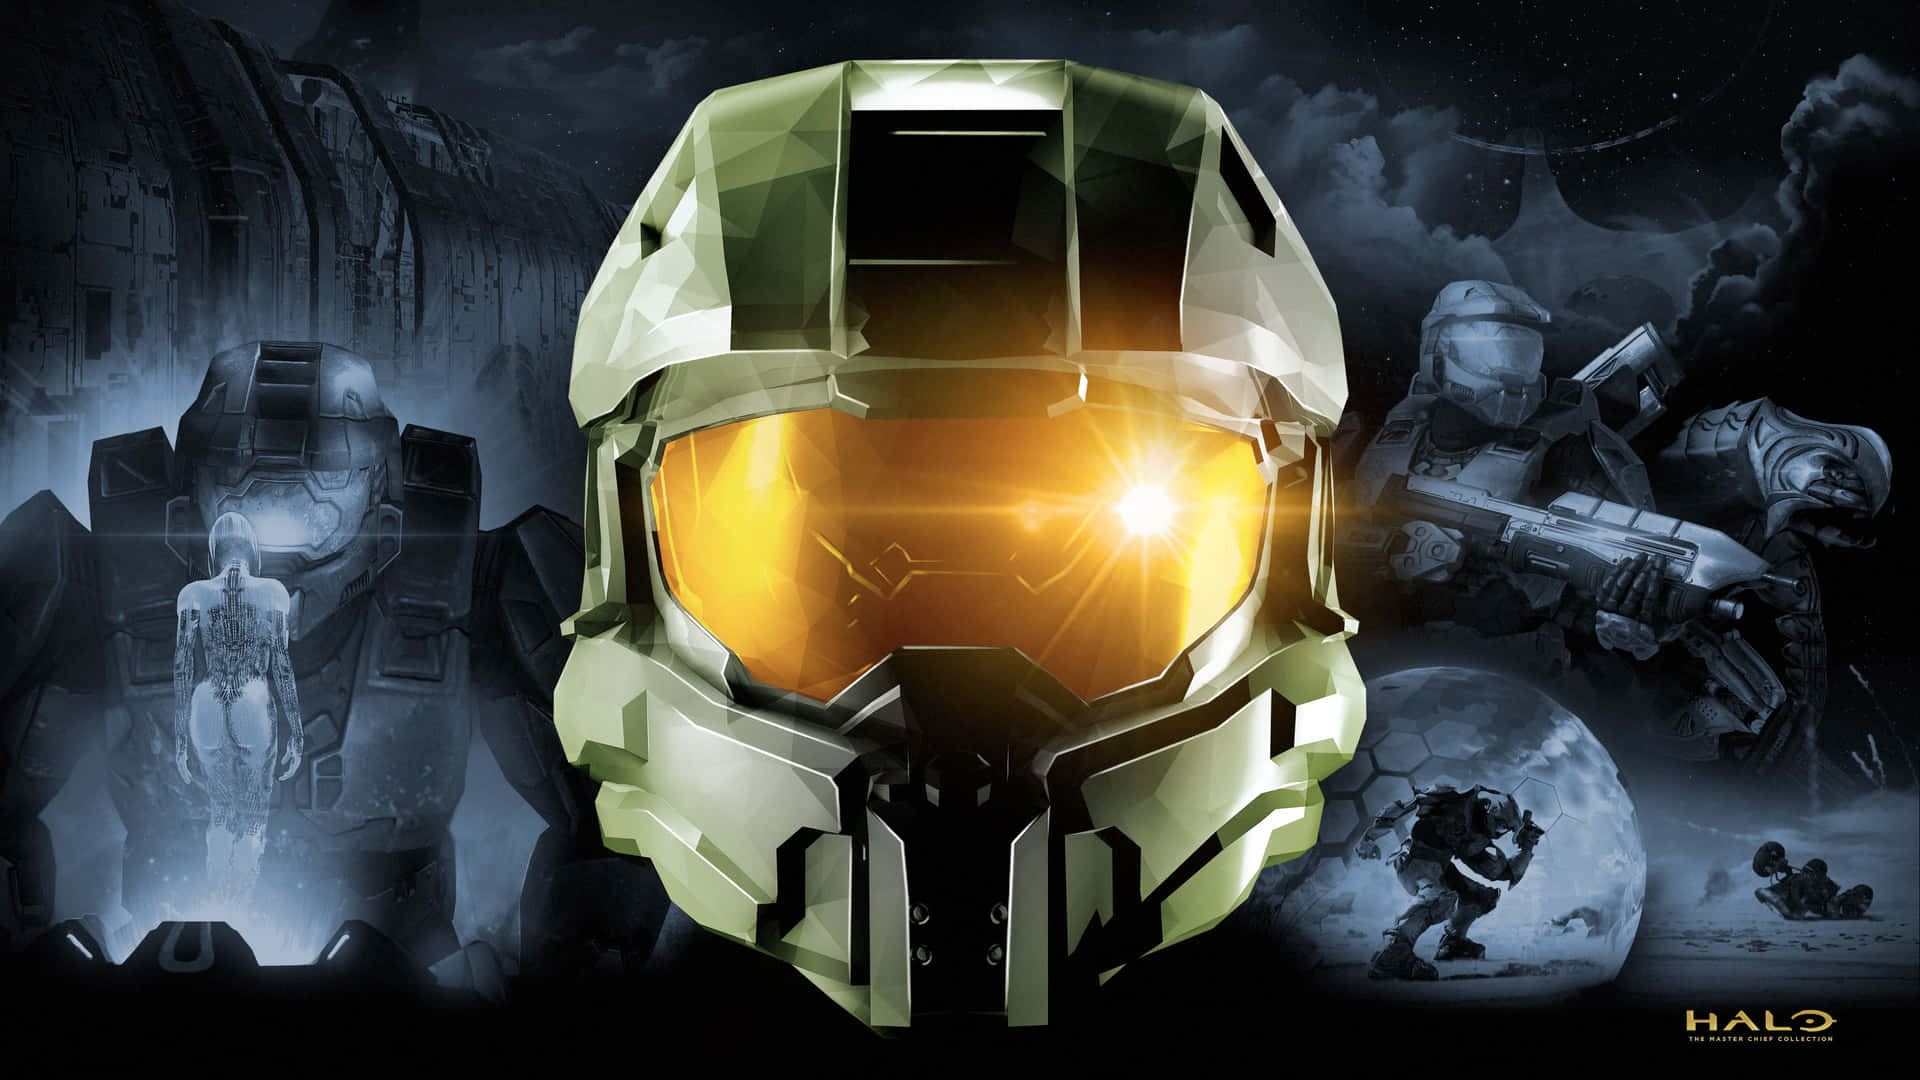 Master Chief of the United Nations Space Command in the game "Halo"